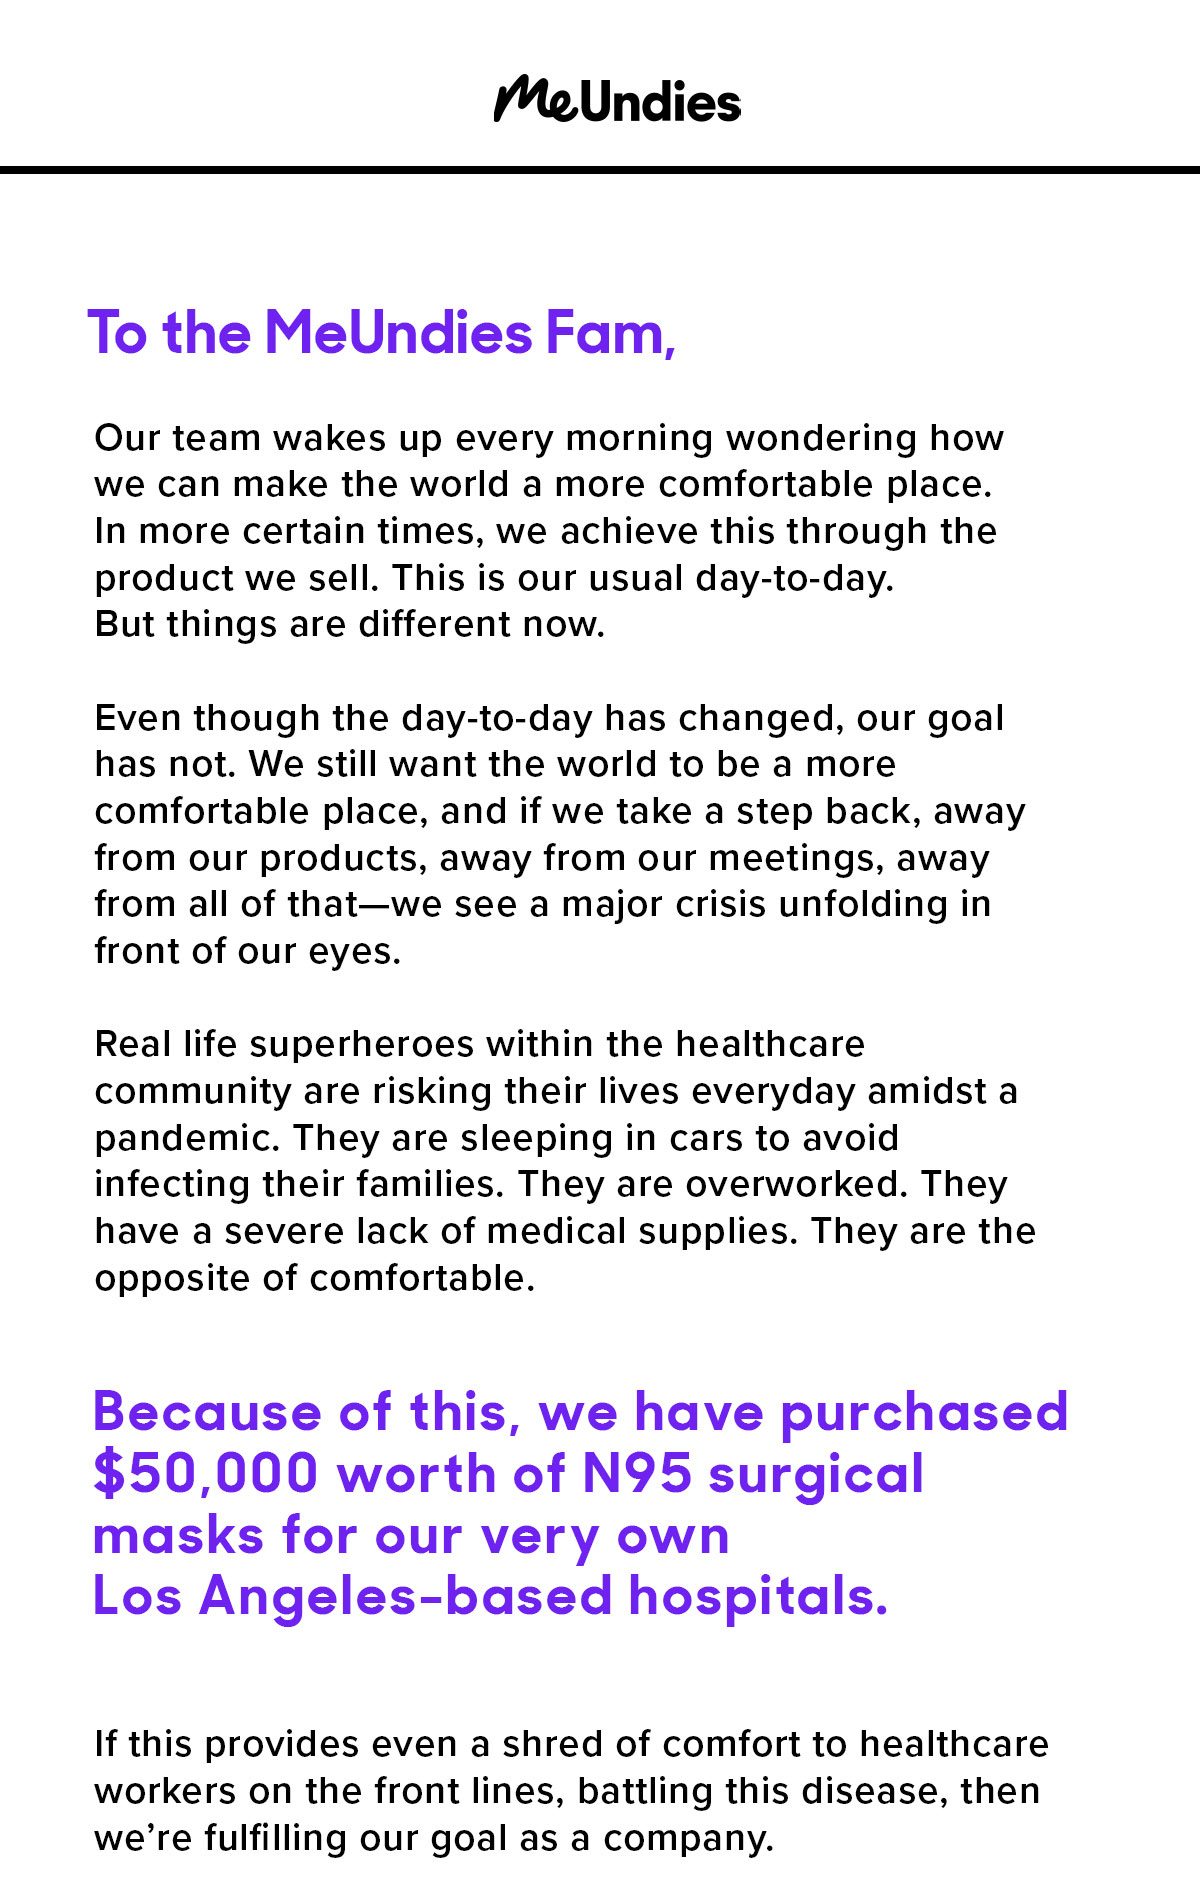 To the MeUndies Fam, Our team wakes up every morning wondering how we can make the world a more comfortable place. In more certain times, we achieve this through the product we sell. This is our usual day-to-day. But things are different now. Even though the day-to-day has changed, our goal has not. We still want the world to be a more comfortable place, and if we take a step back, away from our products, away from our meetings, away from all of that—we see a major crisis unfolding in front of our eyes. Real-life superheroes within the healthcare community are risking their lives everyday amidst a pandemic. They are sleeping in cars to avoid infecting their families. They are overworked. They have a severe lack of medical supplies. They are the opposite of comfortable. Because of this, we have purchased $50,000 worth of n95 surgical masks for our very own Los Angeles-based hospitals. If this provides even a shred of comfort to healthcare workers on the front lines, battling this disease, then we’re fulfilling our goal as a company. 